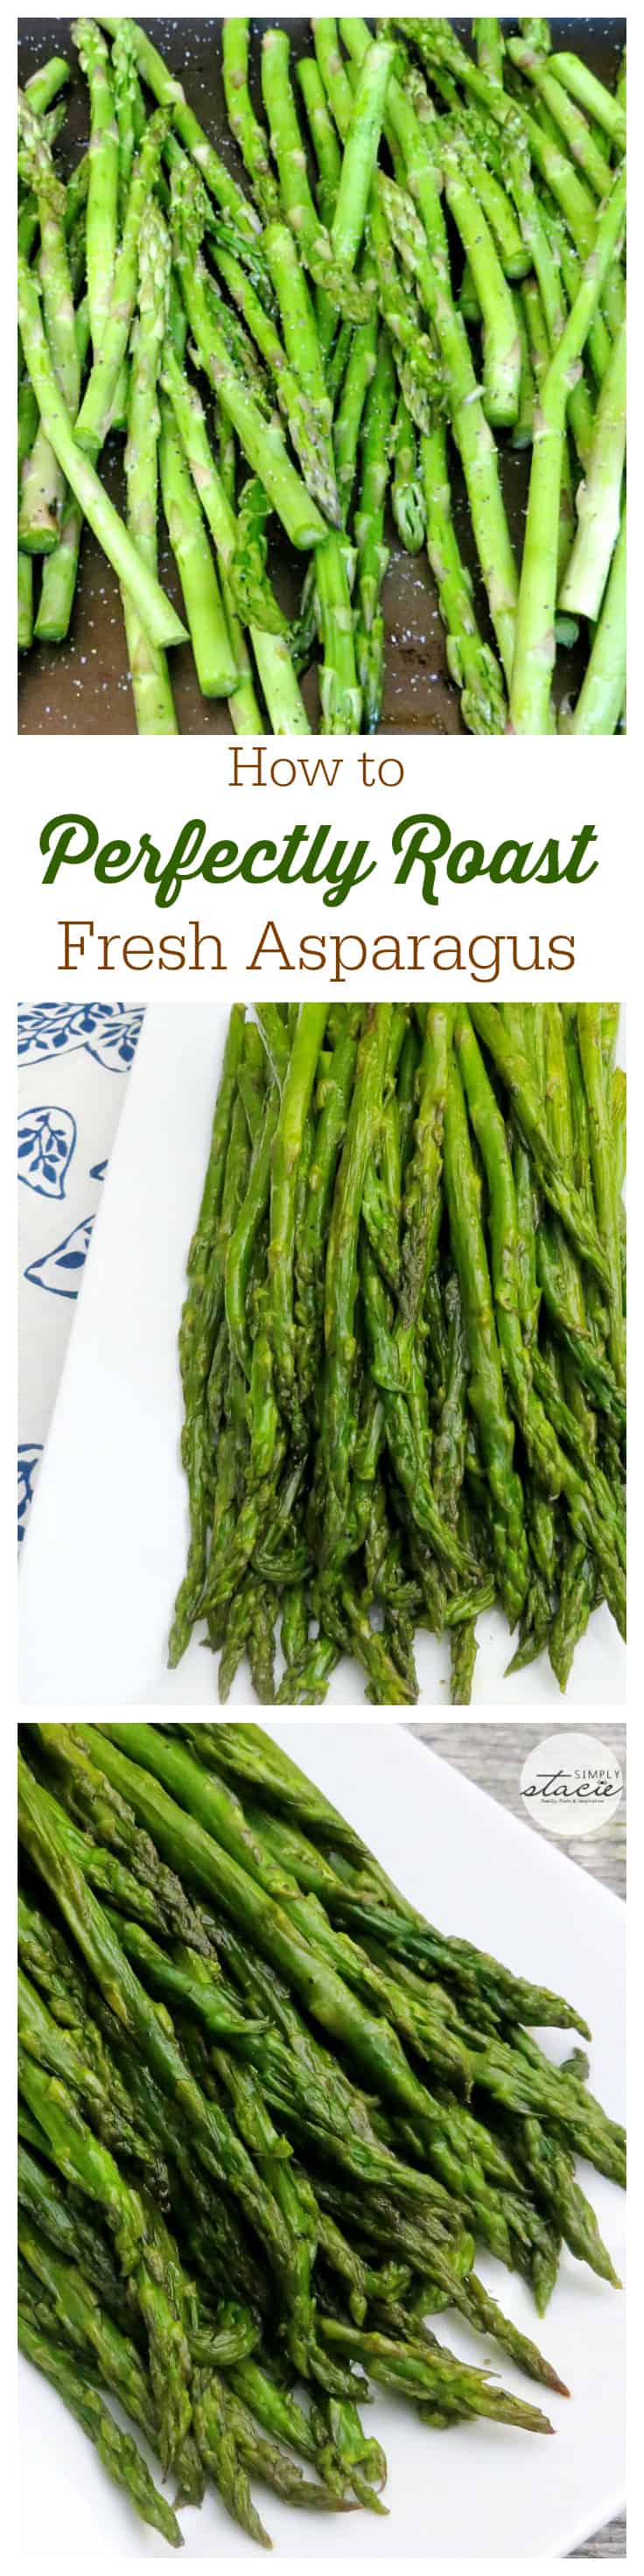 Oven Roasted Asparagus - The best way to make asparagus in the oven every time! Get the crispiest roasted asparagus for the perfect side dish.